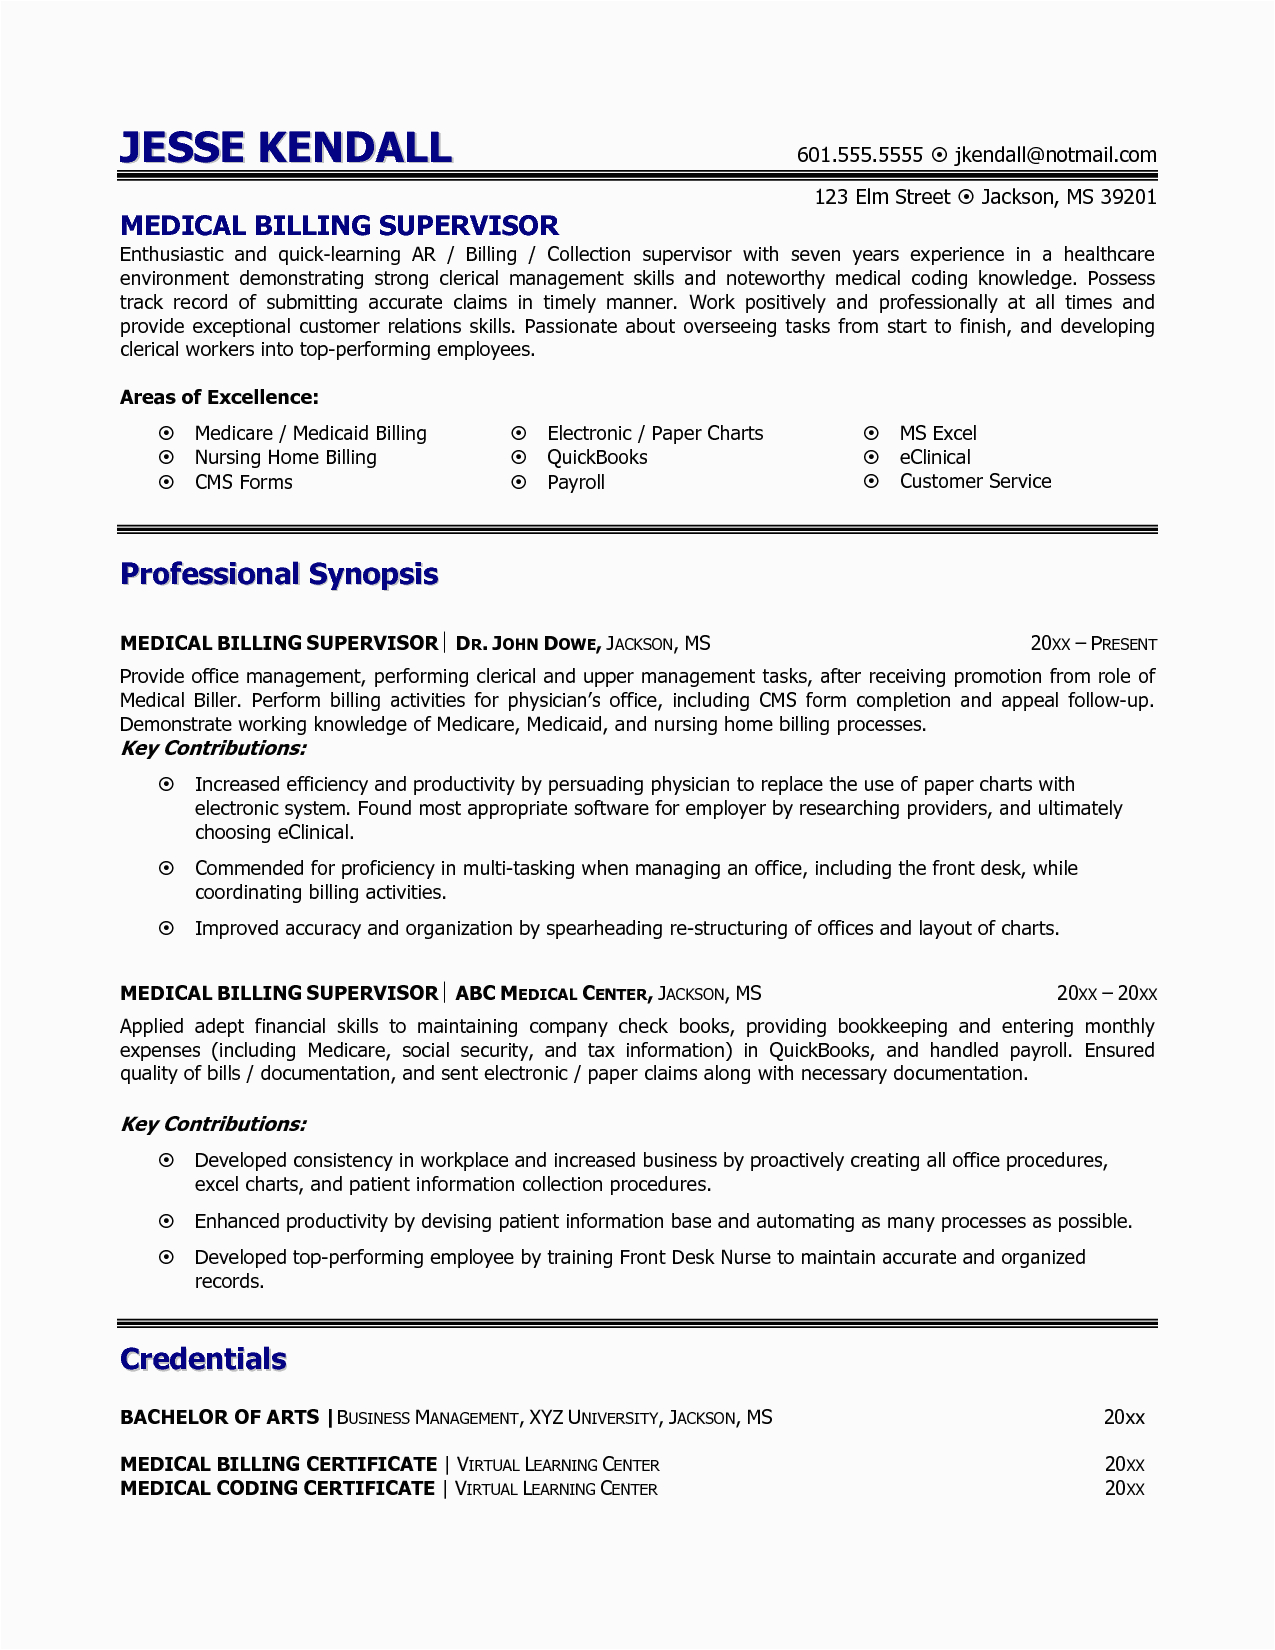 Medical Billing and Coding Resume Templates Medical Billing and Coding Resume Example